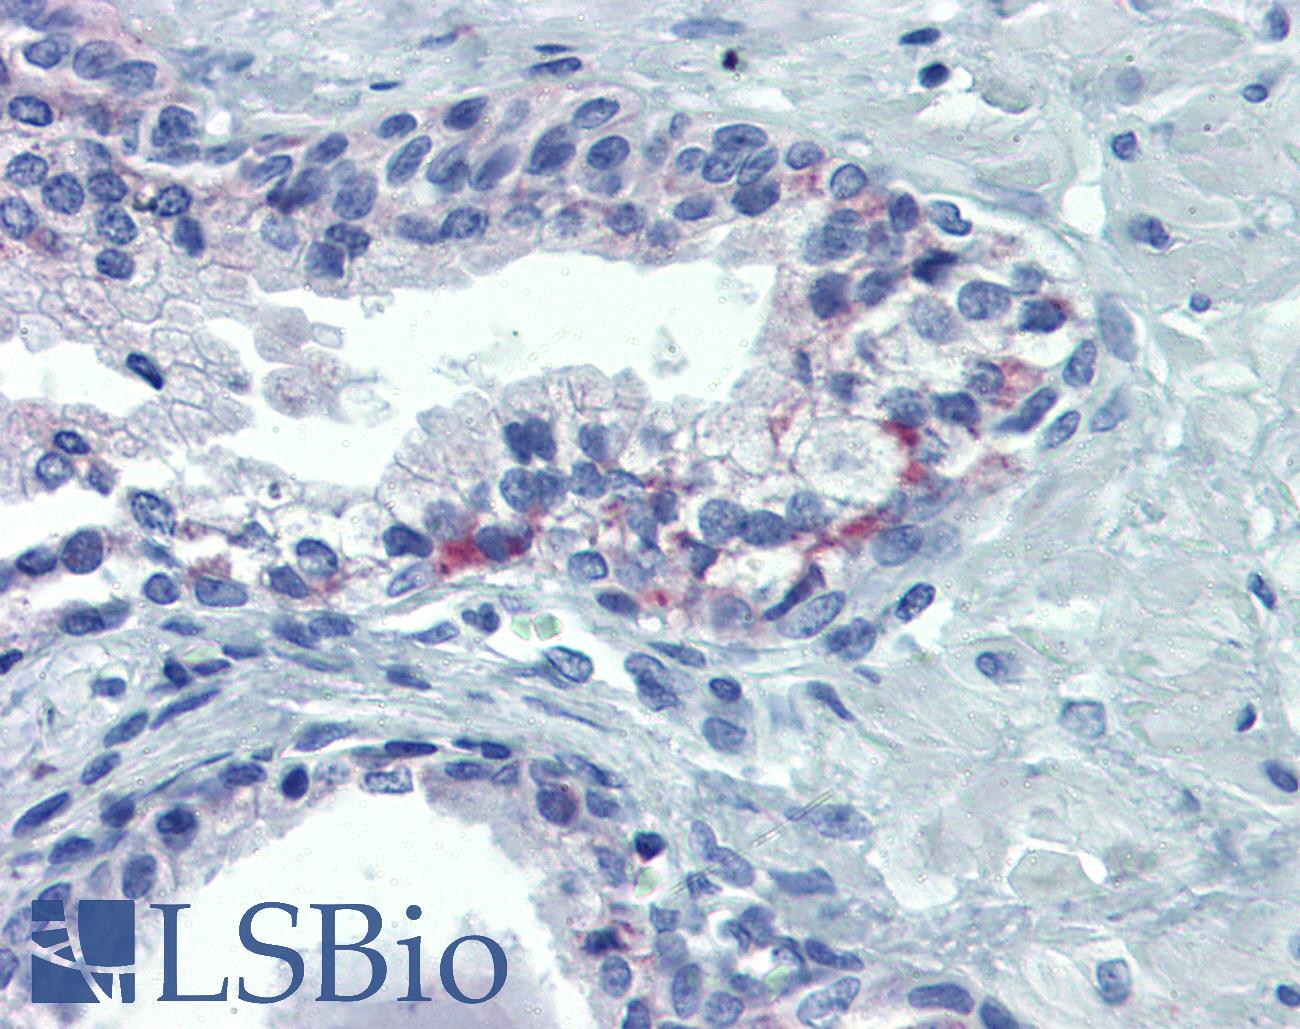 OR51E1 Antibody - Anti-OR51E1 antibody IHC of human prostate. Immunohistochemistry of formalin-fixed, paraffin-embedded tissue after heat-induced antigen retrieval. Antibody concentration 20 ug/ml.